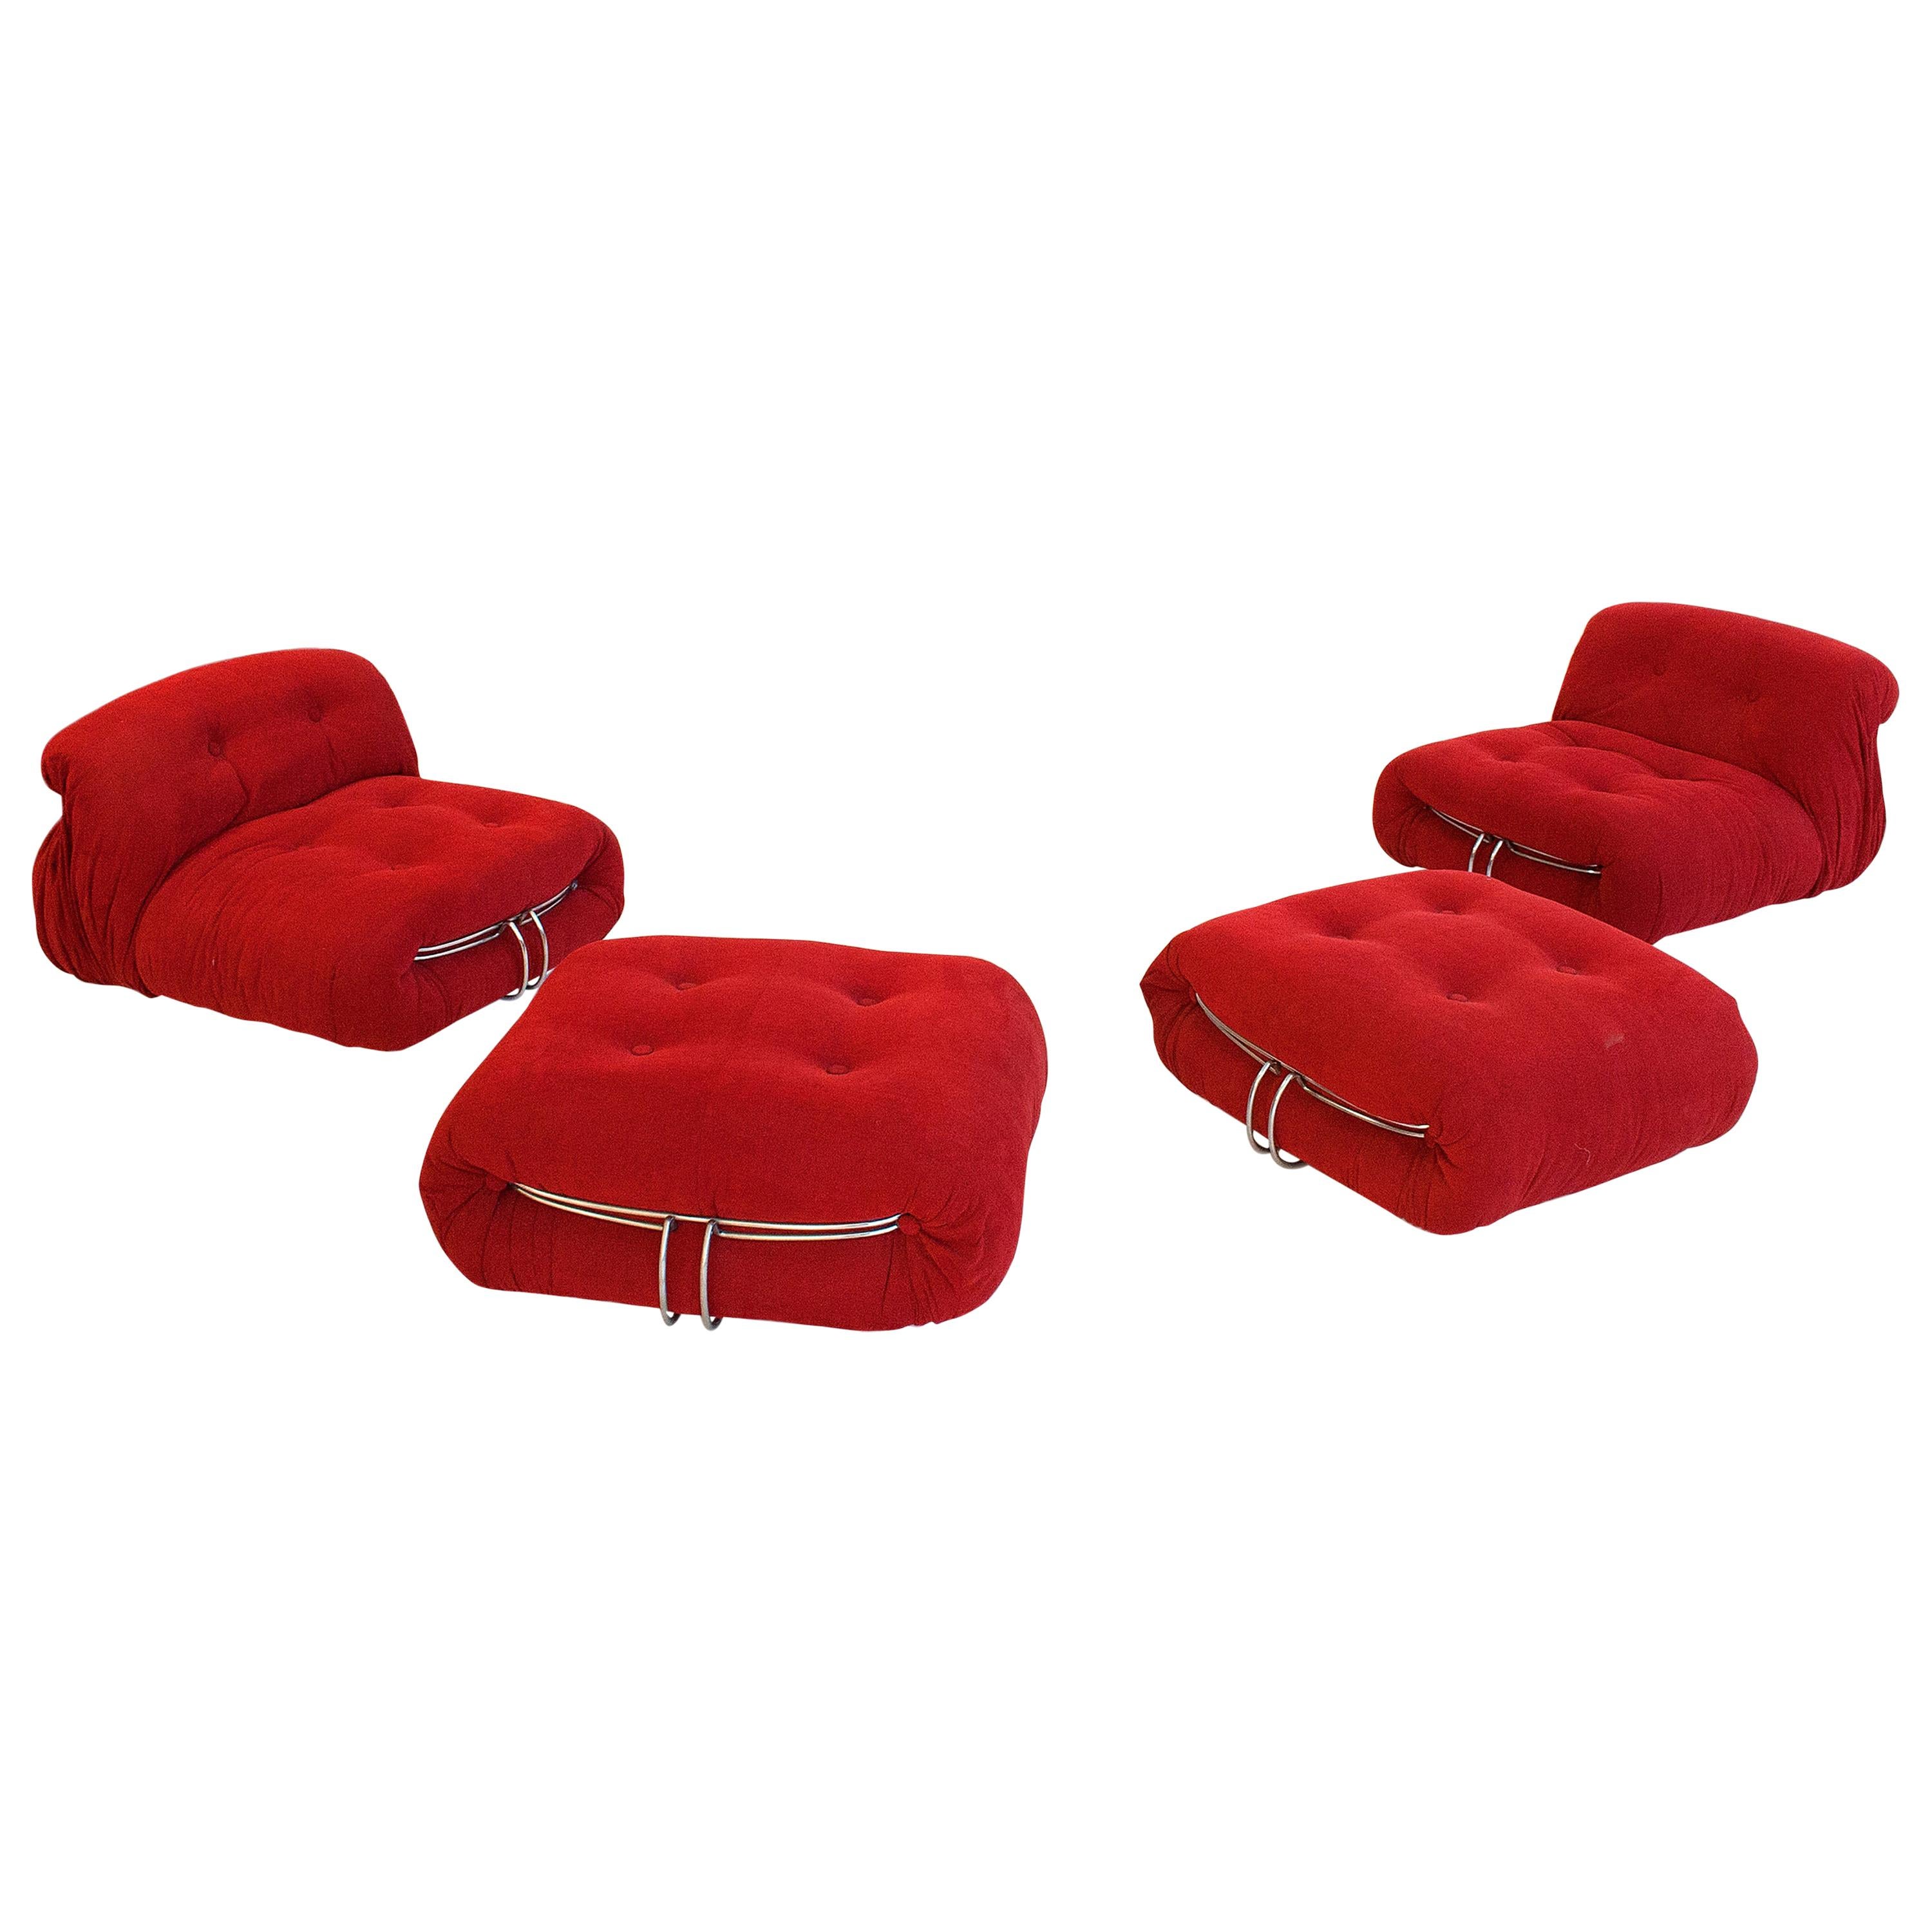 Pair of "Soriana" Slipper Chairs and Ottomans by Tobia Scarpa, circa 1970, Italy